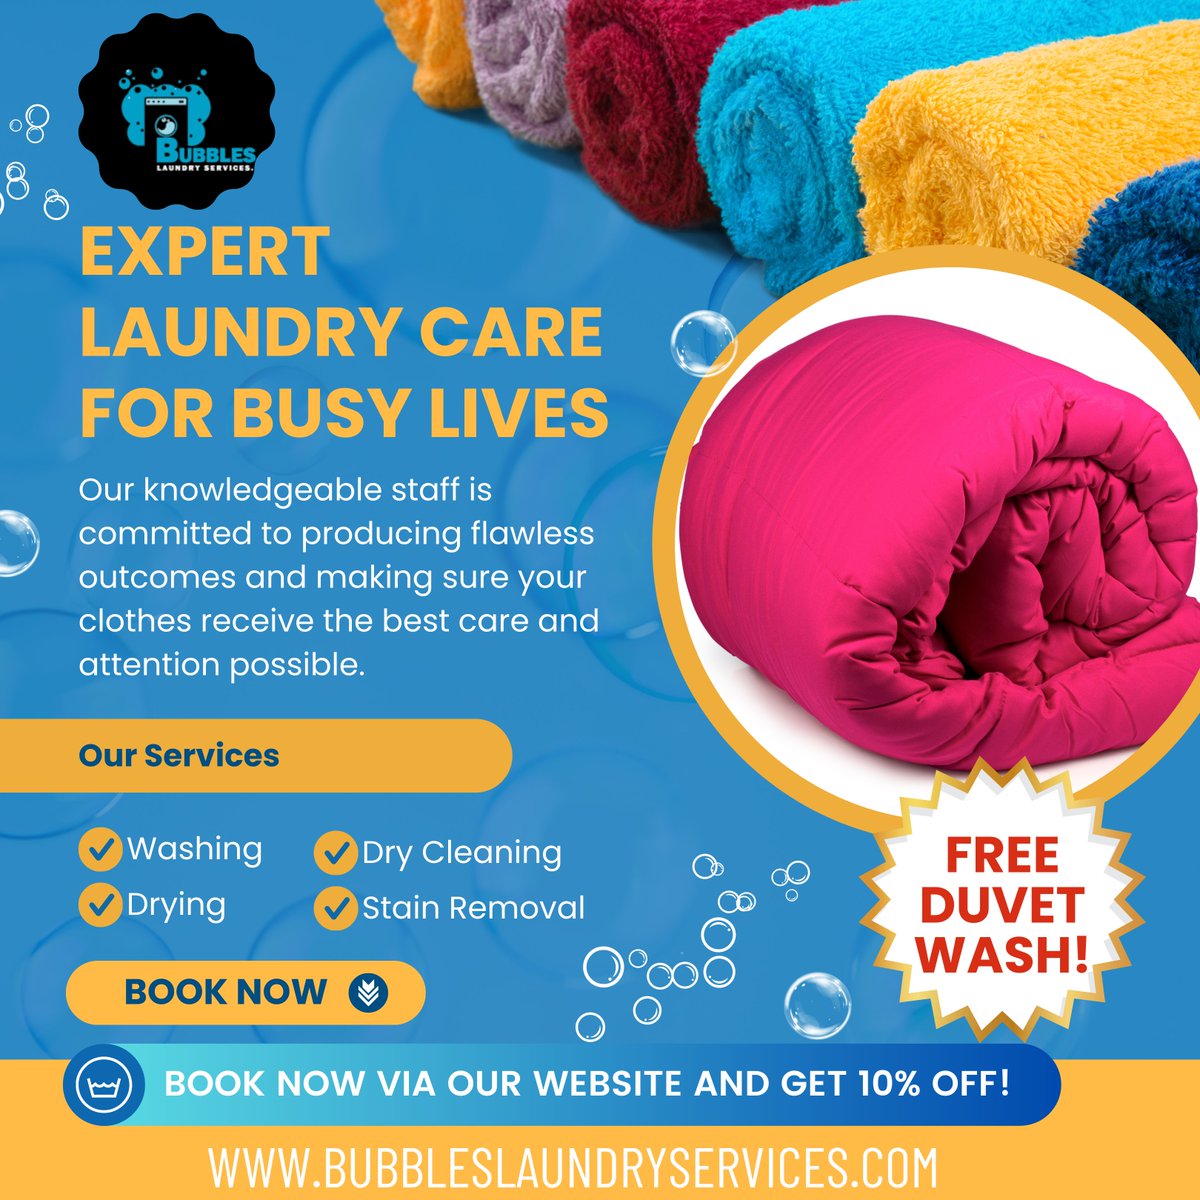 🌟 Our expert team is here to make laundry day a breeze, so you can focus on what matters most. Plus, don't miss our exclusive offer! #LaundryService #FreshnessEveryday 🧺🌸#BuildingLIVESScholarship #Tuliwashow #OPPOReno11F5GKe Adopt A Student Cup of UjiKenya #KuzaICTAwardsLaunch